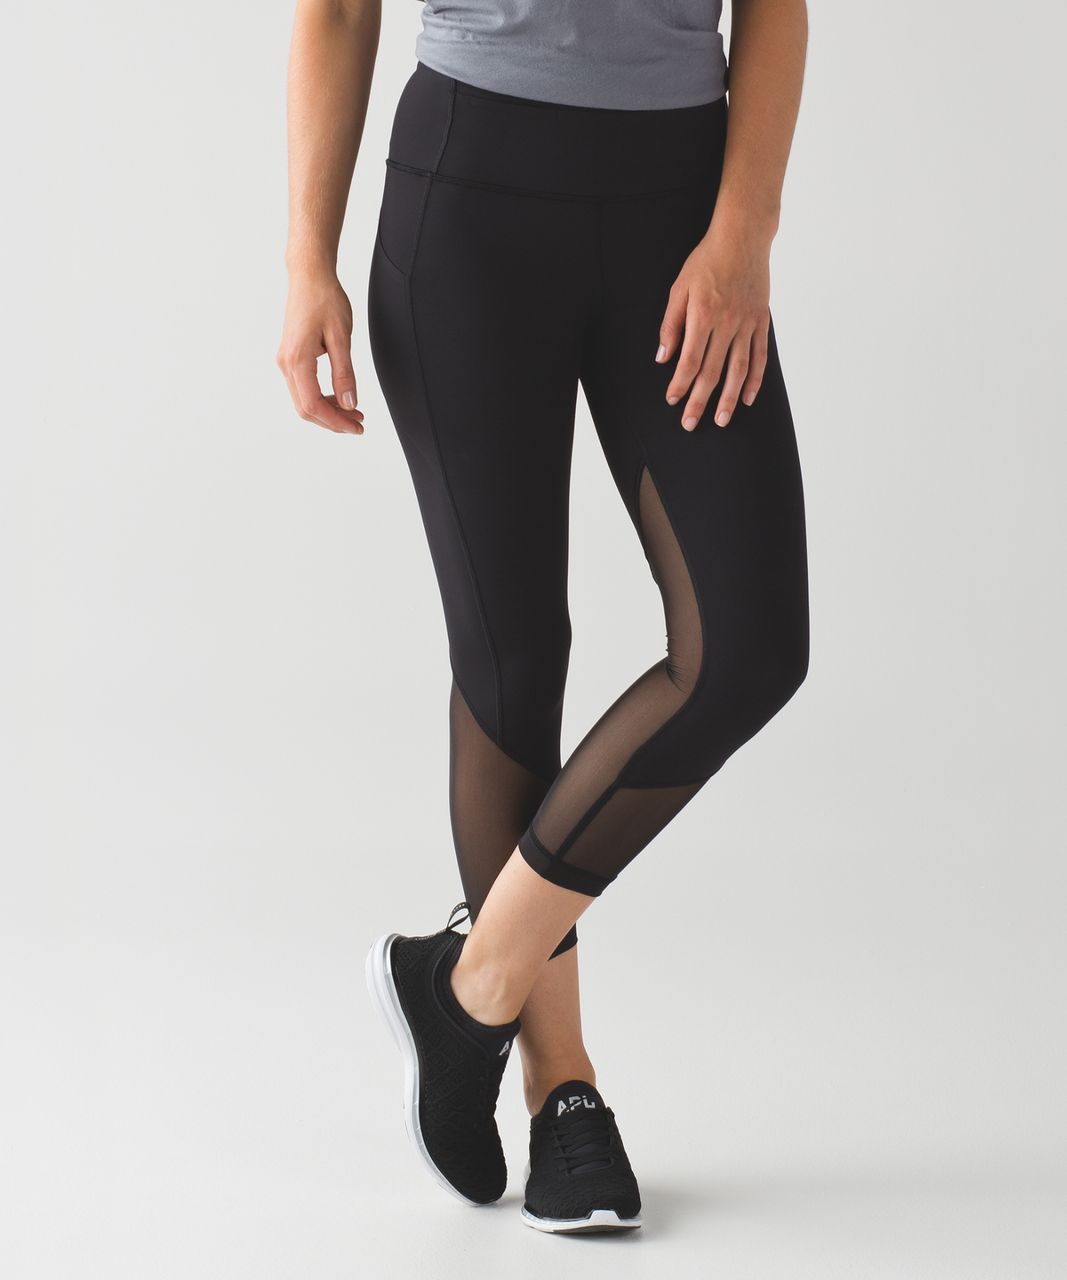 NWT Lululemon Pace Rival HR Crop Legging 22 Size 6 Heathered Black  Luxtreme